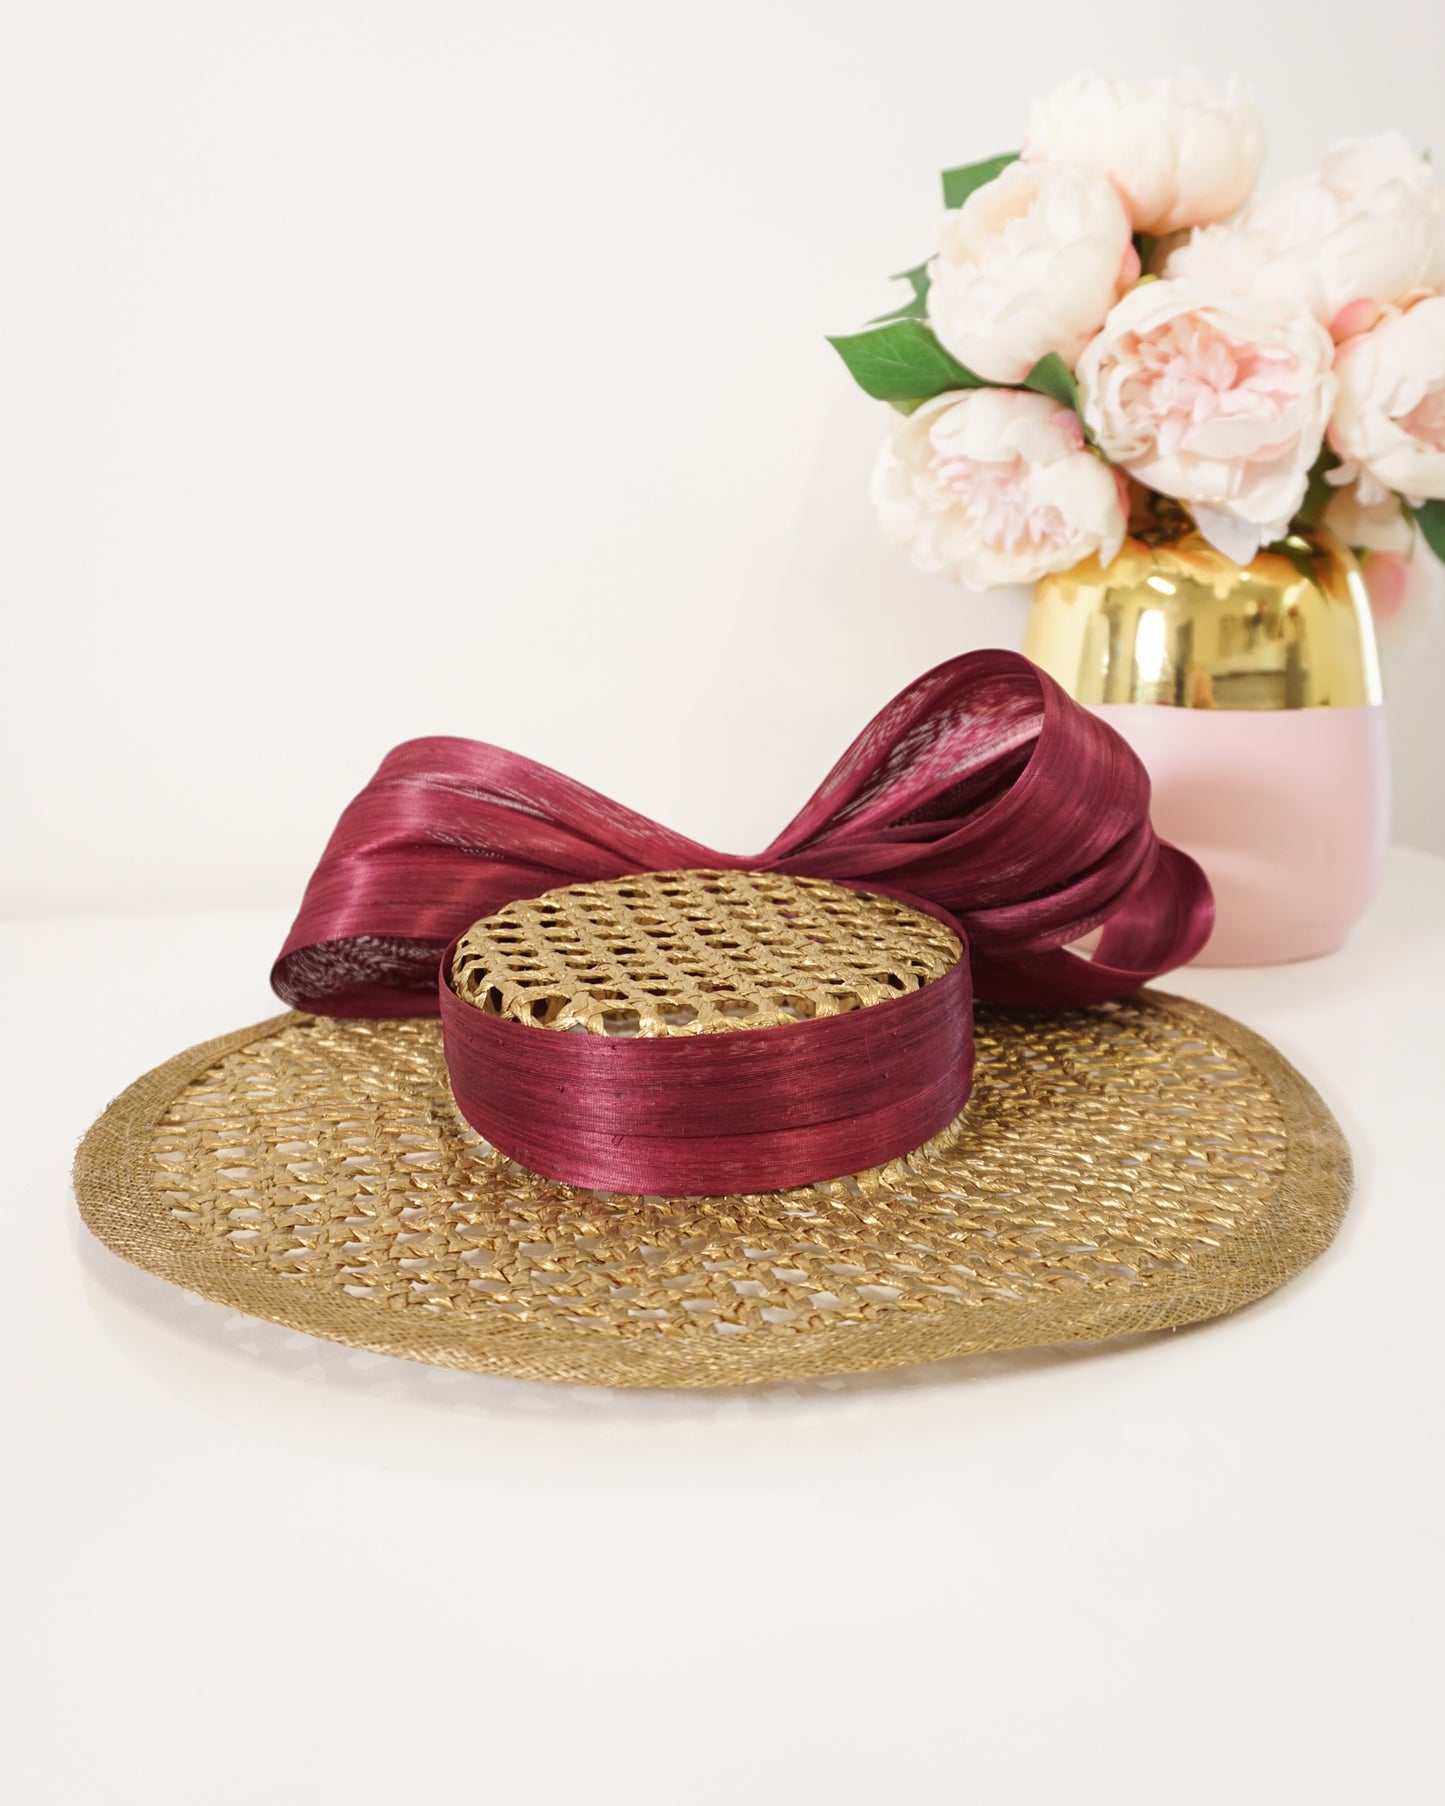 "Sweetheart" Burgandy & Gold Boater - Millinery Hire